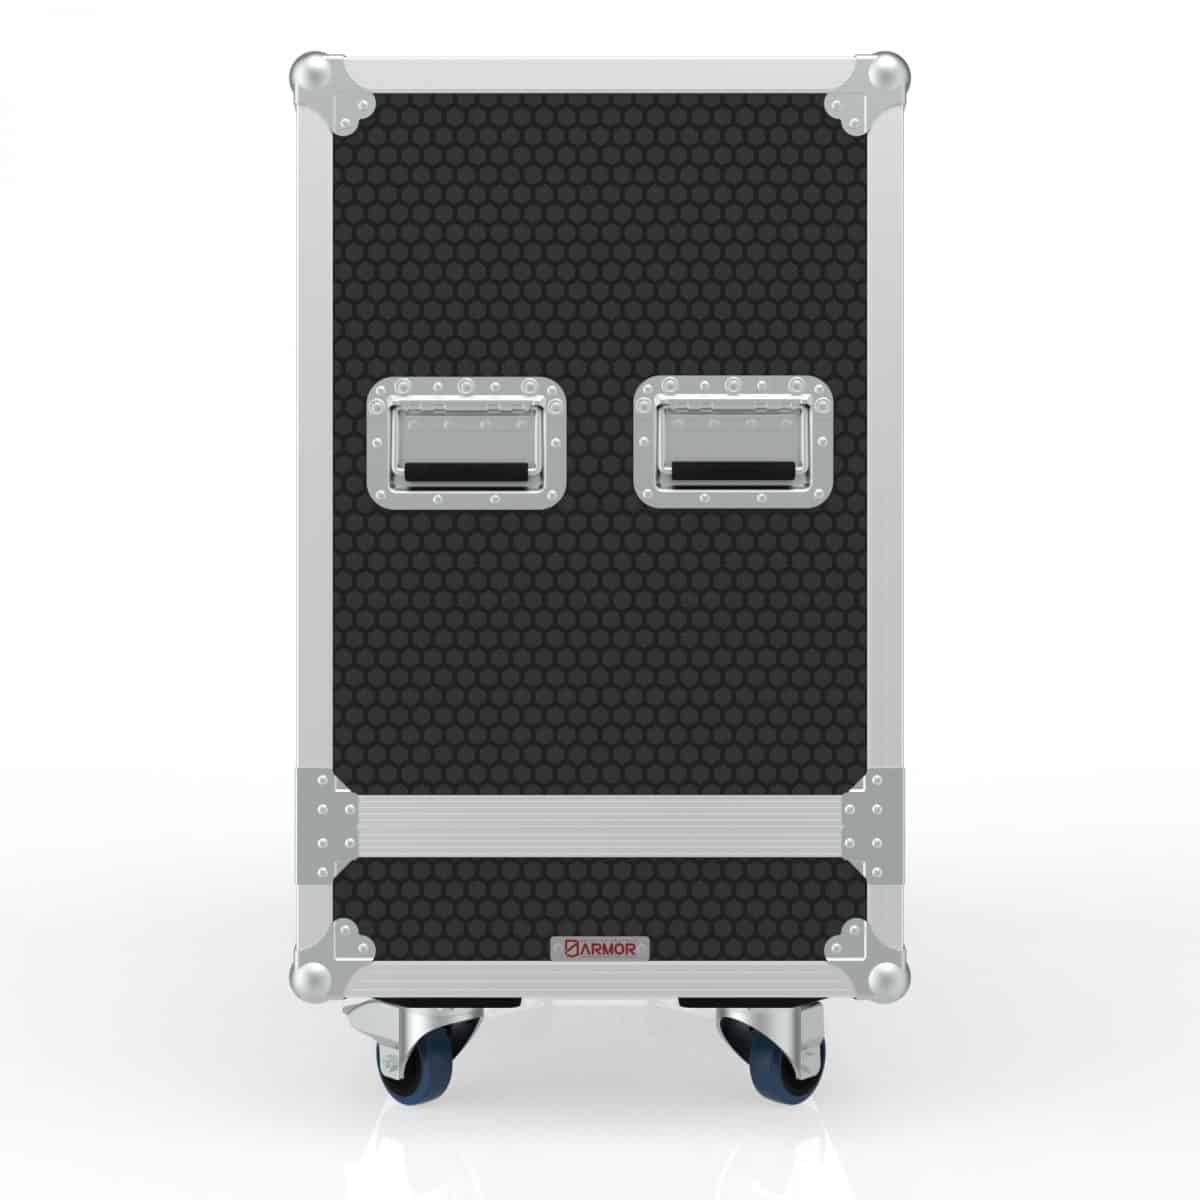 Twin Speaker Road Case 15 Inches